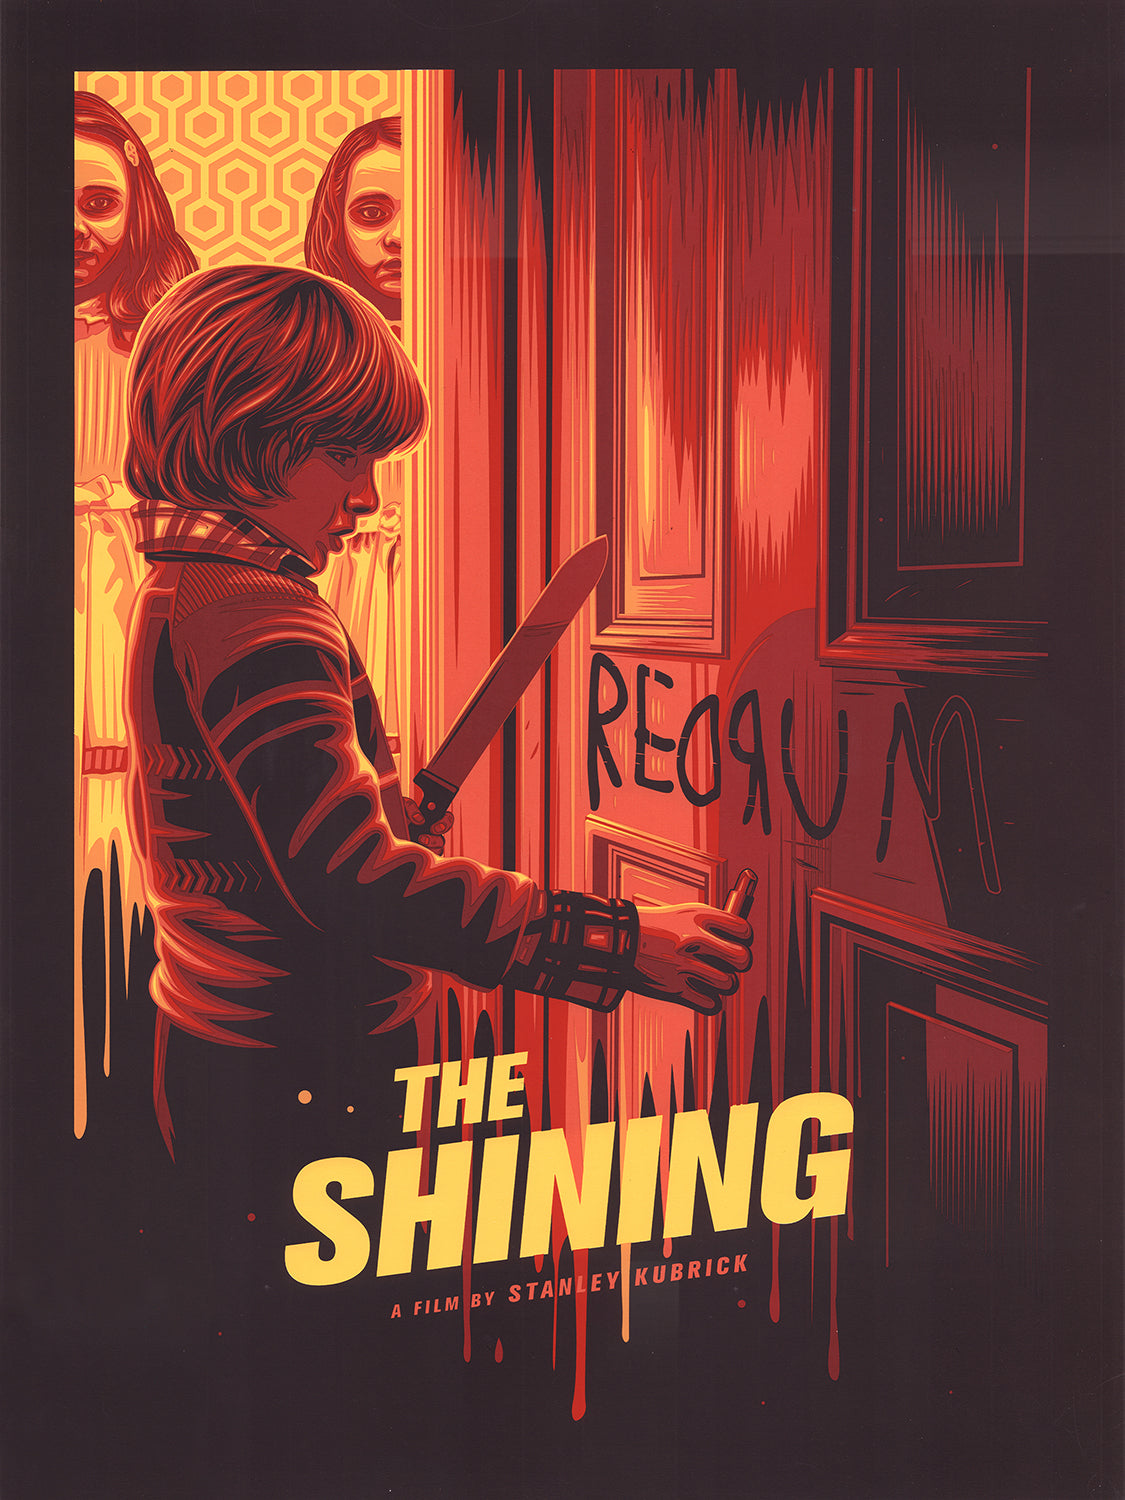 "The Shining Variant" by Dave Stafford